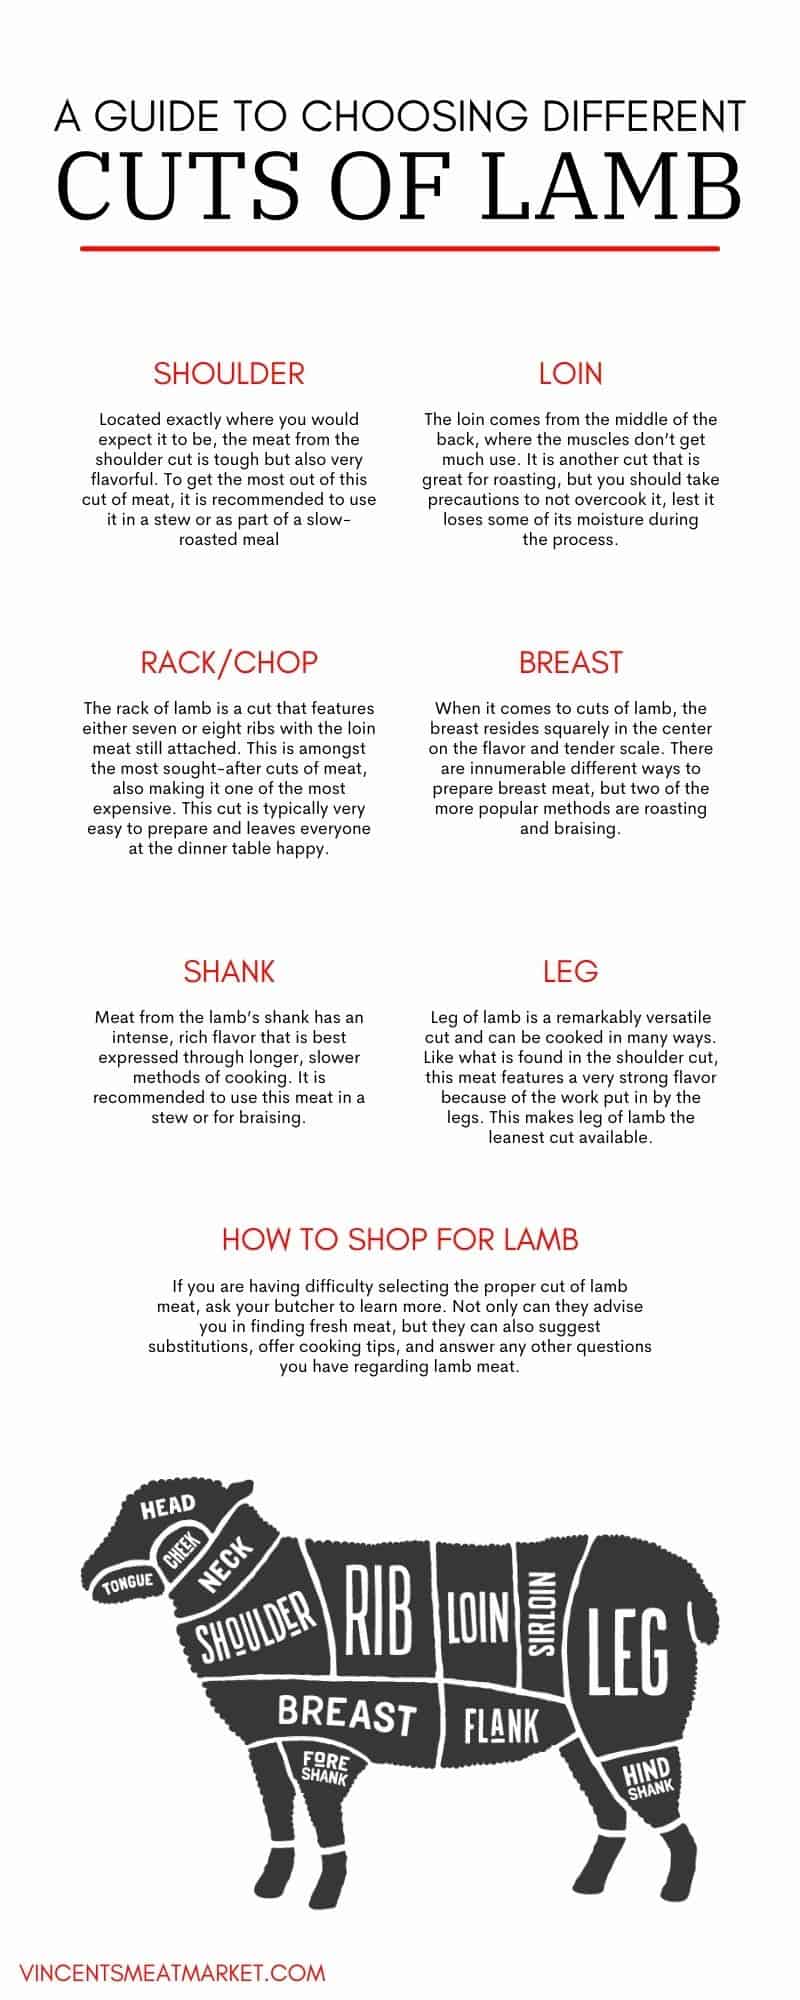 A Guide To Choosing Different Cuts of Lamb